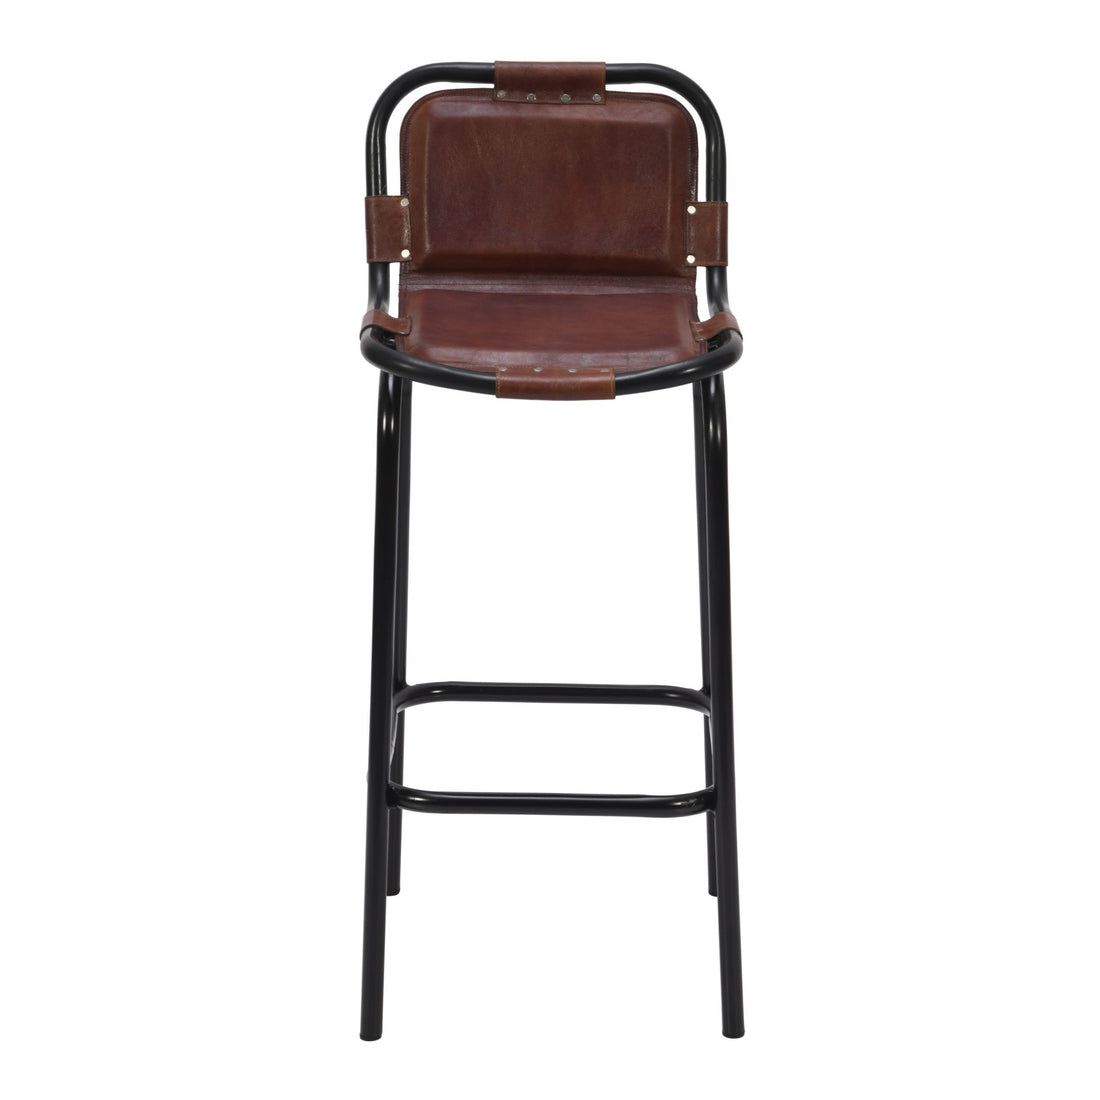 31 Inch Bar Height Chair, Genuine Leather